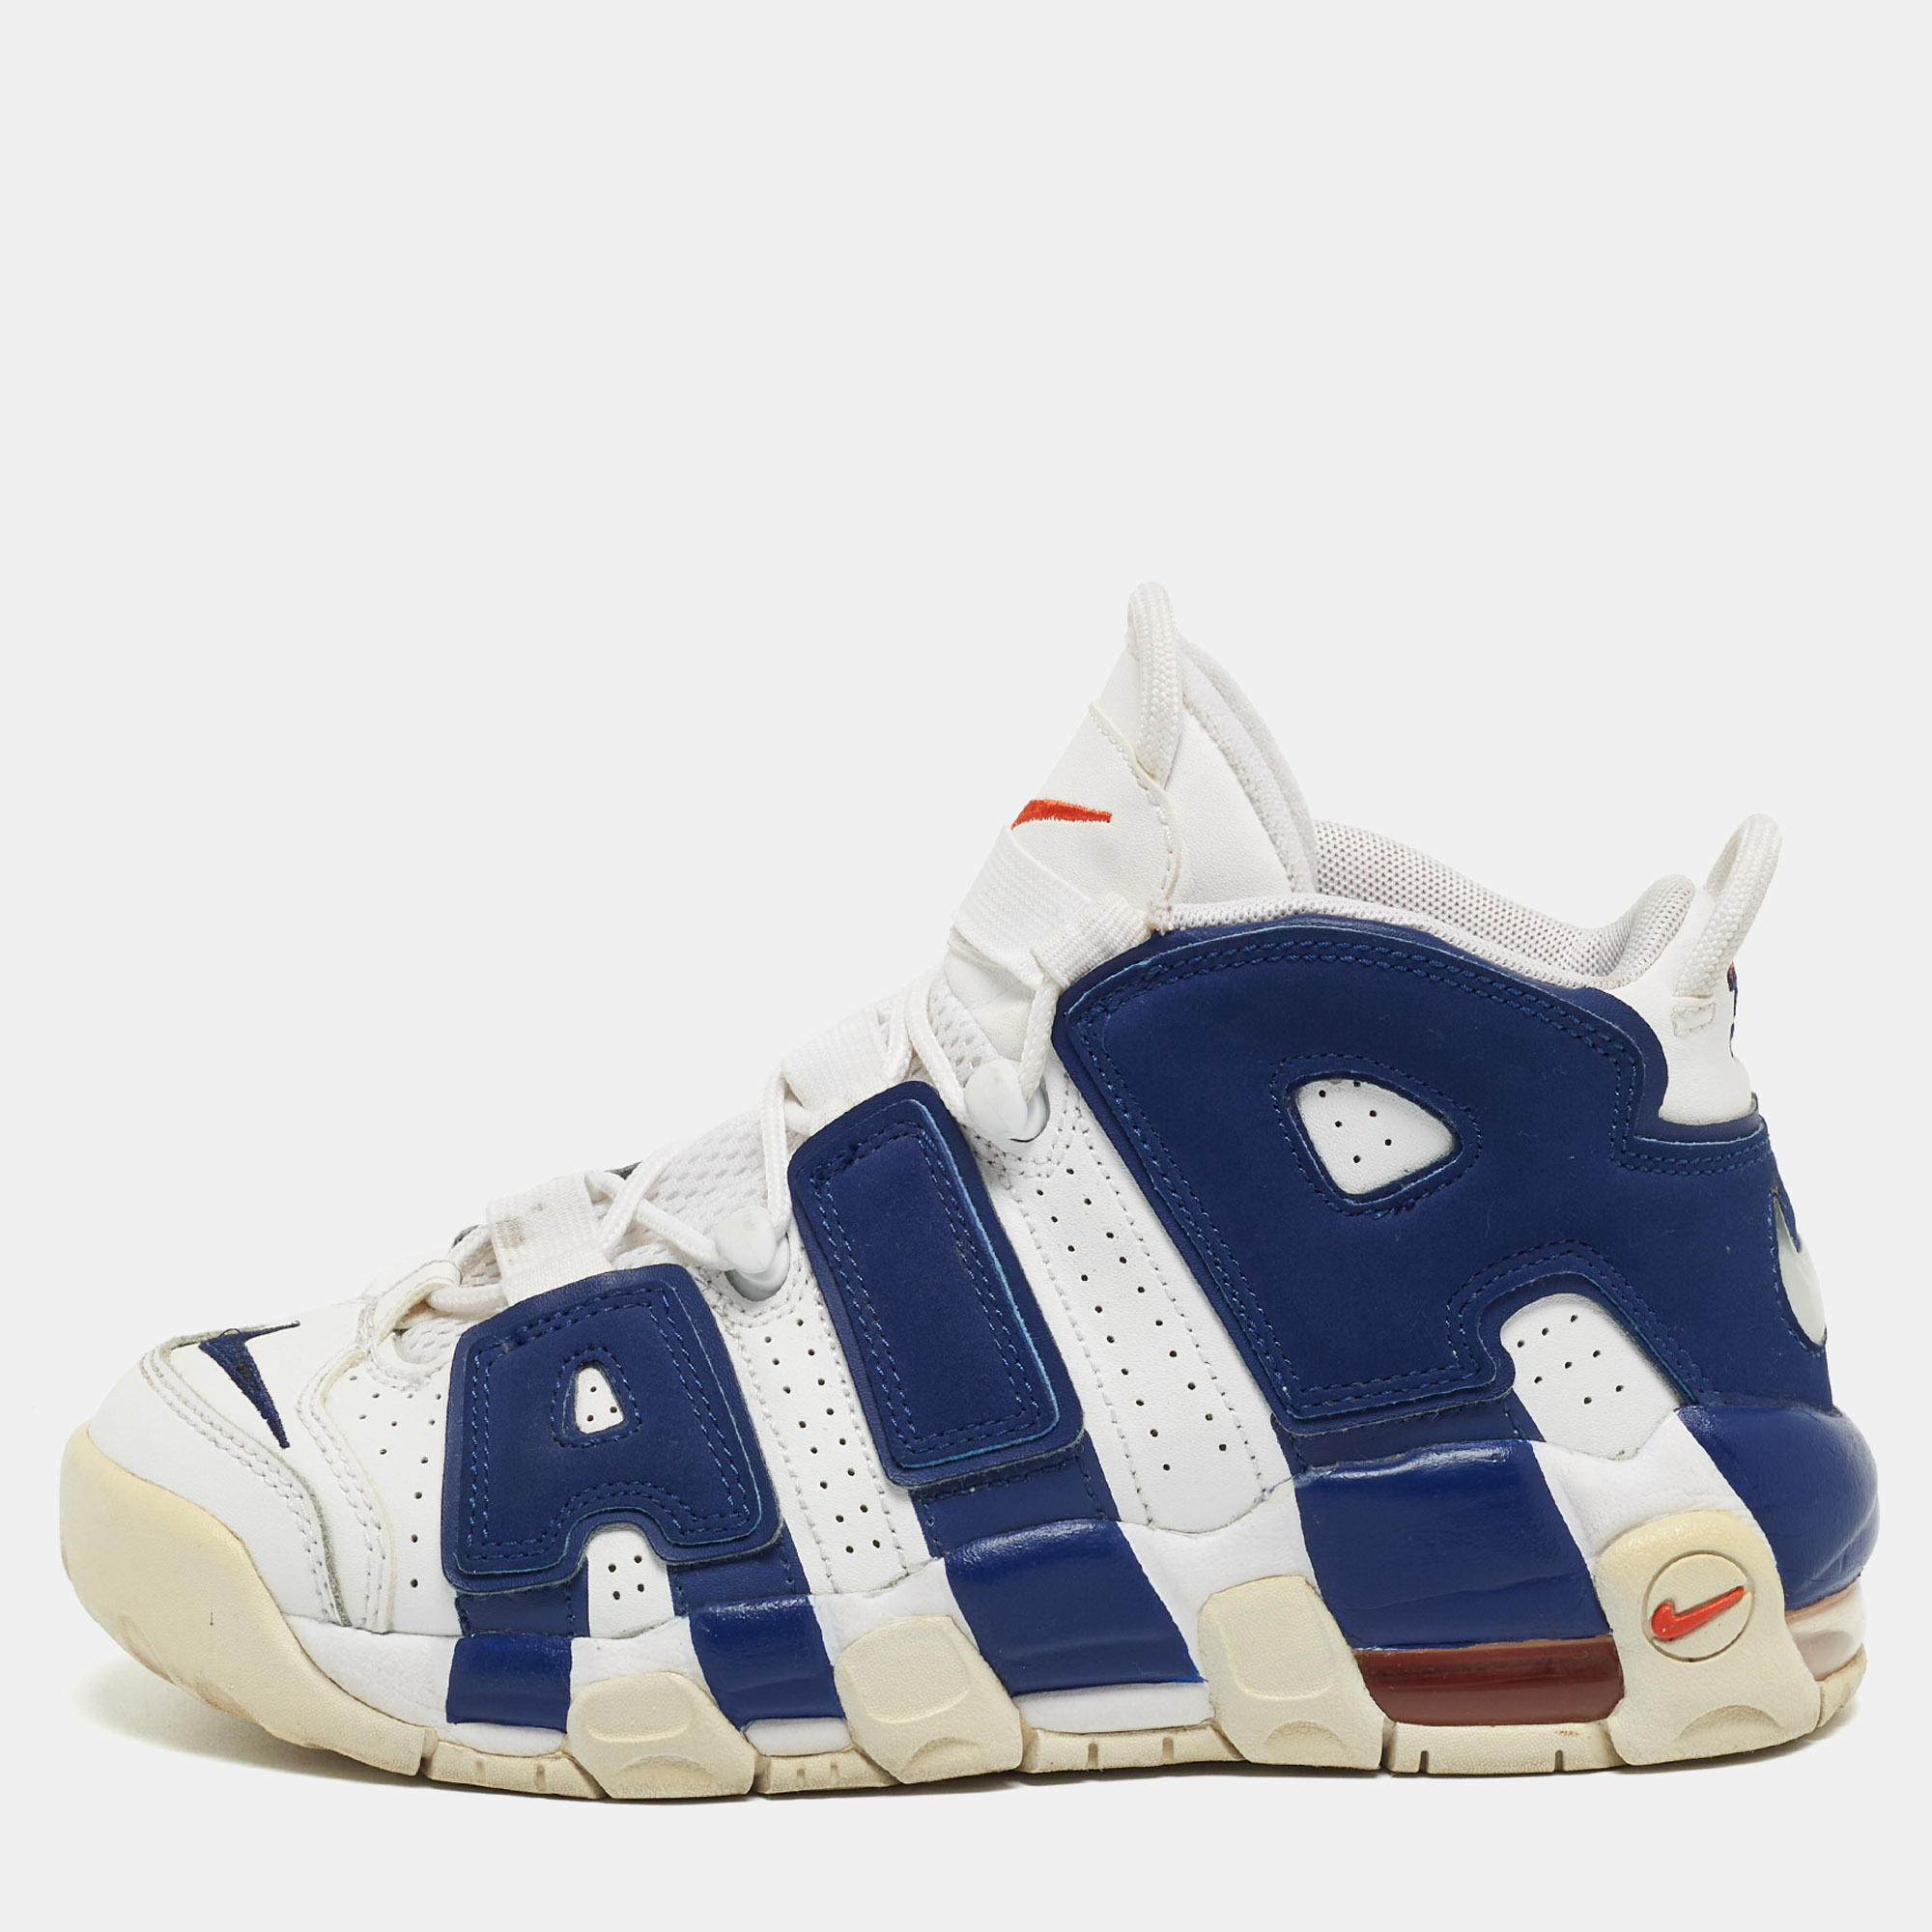 Pre-owned Nike Air White/blue Leather More Uptempo Knicks Sneakers Size 38